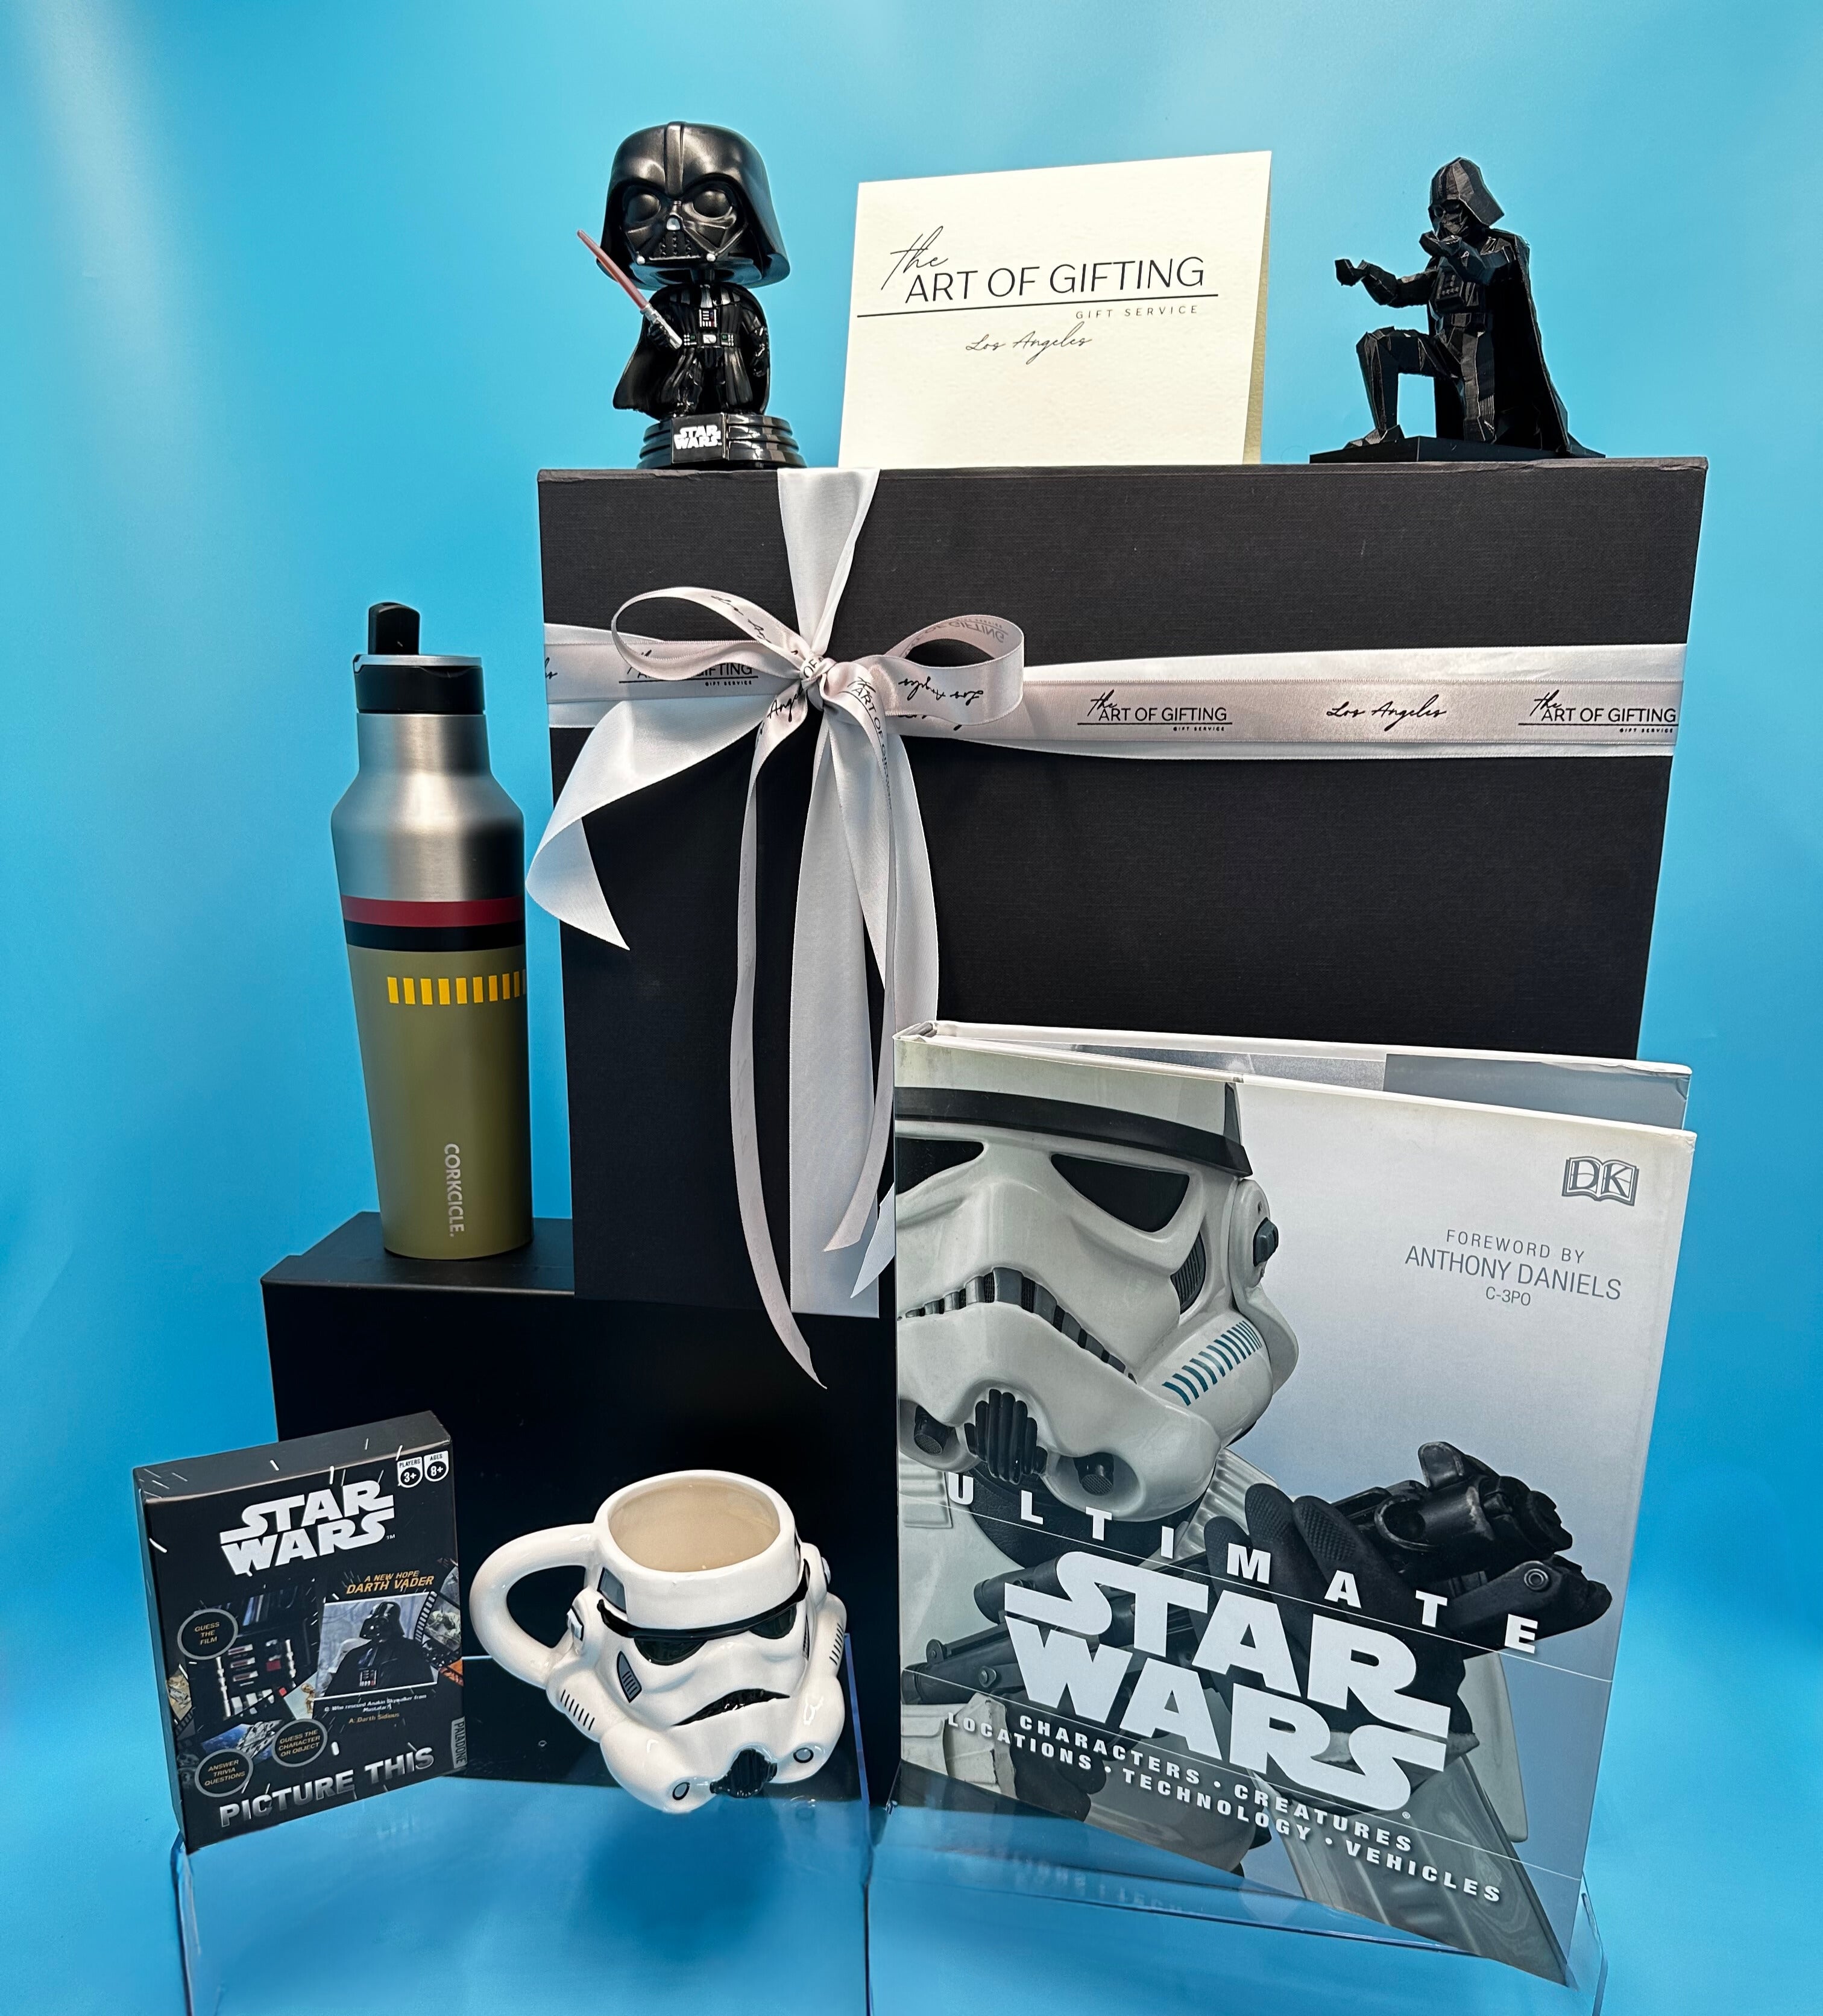 Star Wars Storm Trooper Gift Box – The Art of Gifting